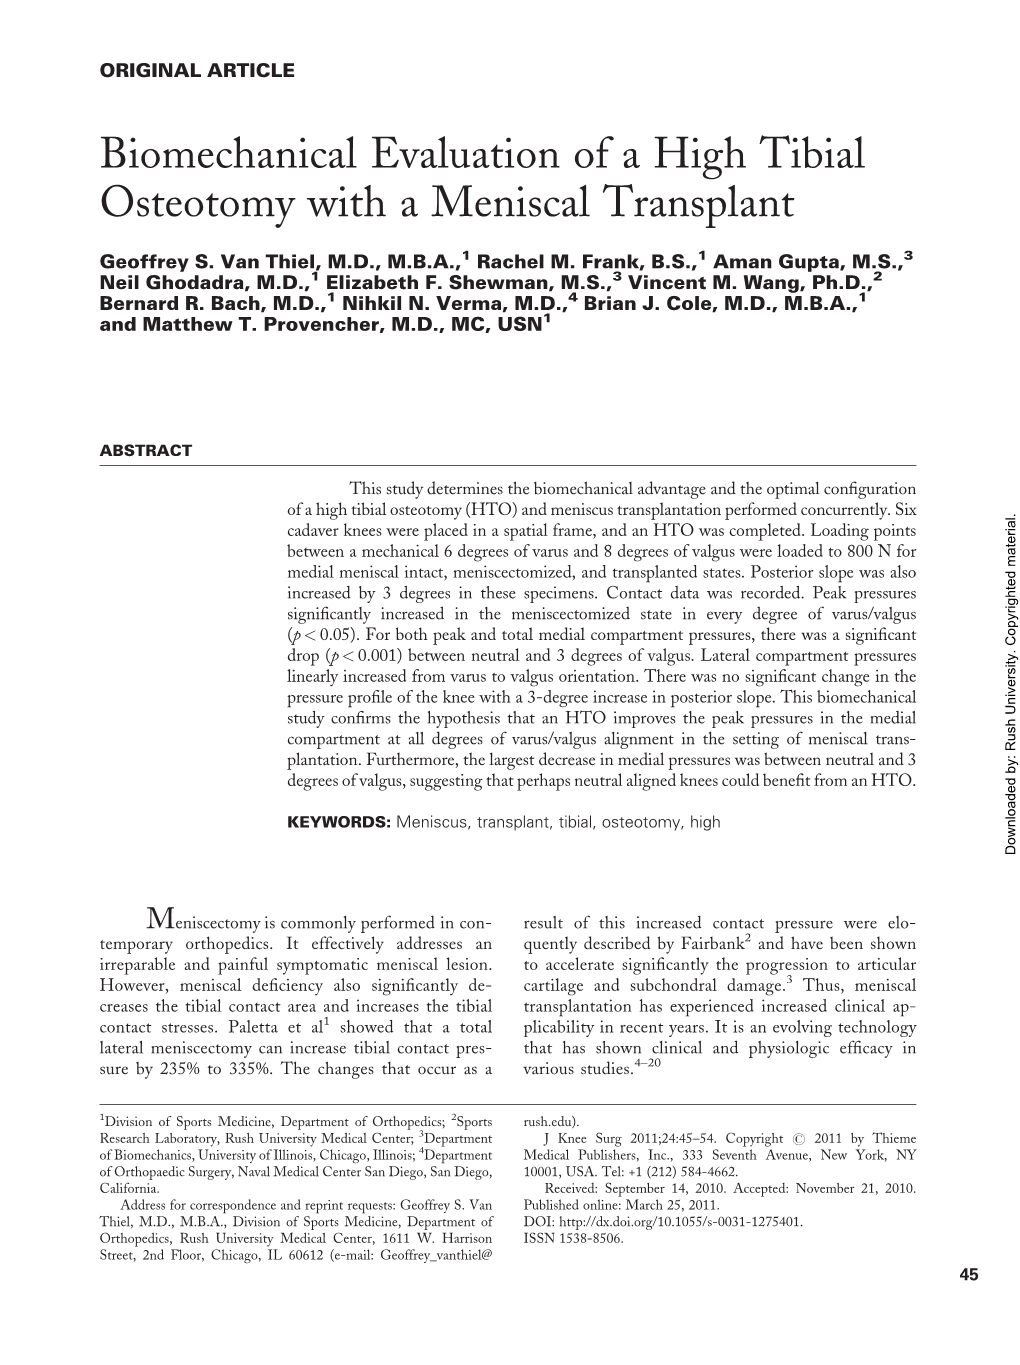 Biomechanical Evaluation of a High Tibial Osteotomy with a Meniscal Transplant